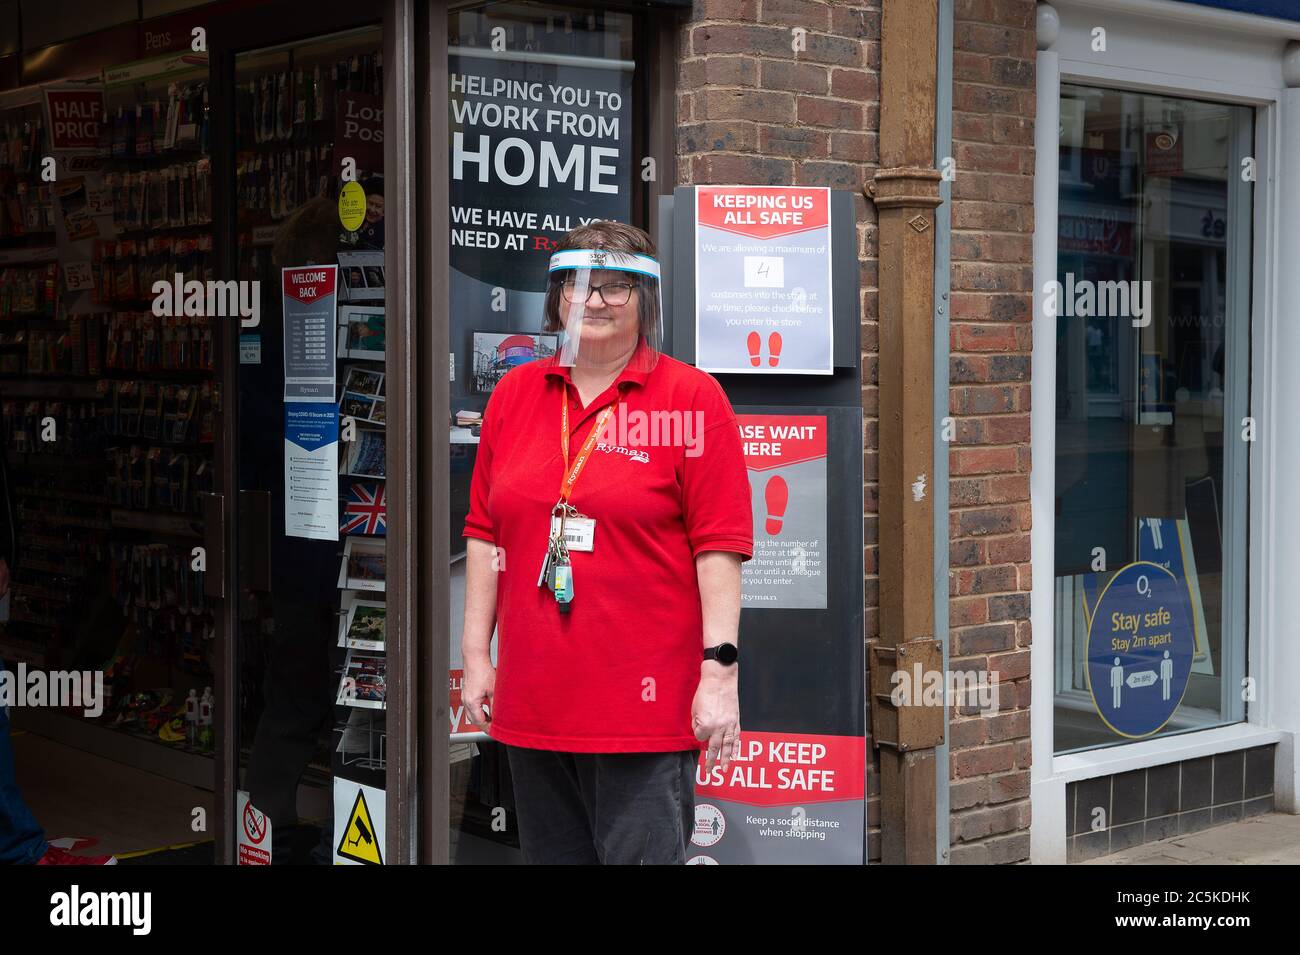 Windsor, Berkshire, UK. 3rd July, 2020. A member of staff at Ryman stationers shop in Windsor, Berkshire waits outside to advise customers on adhering to Coronavirus hygiene rules in their shop. Credit: Maureen McLean/Alamy Stock Photo